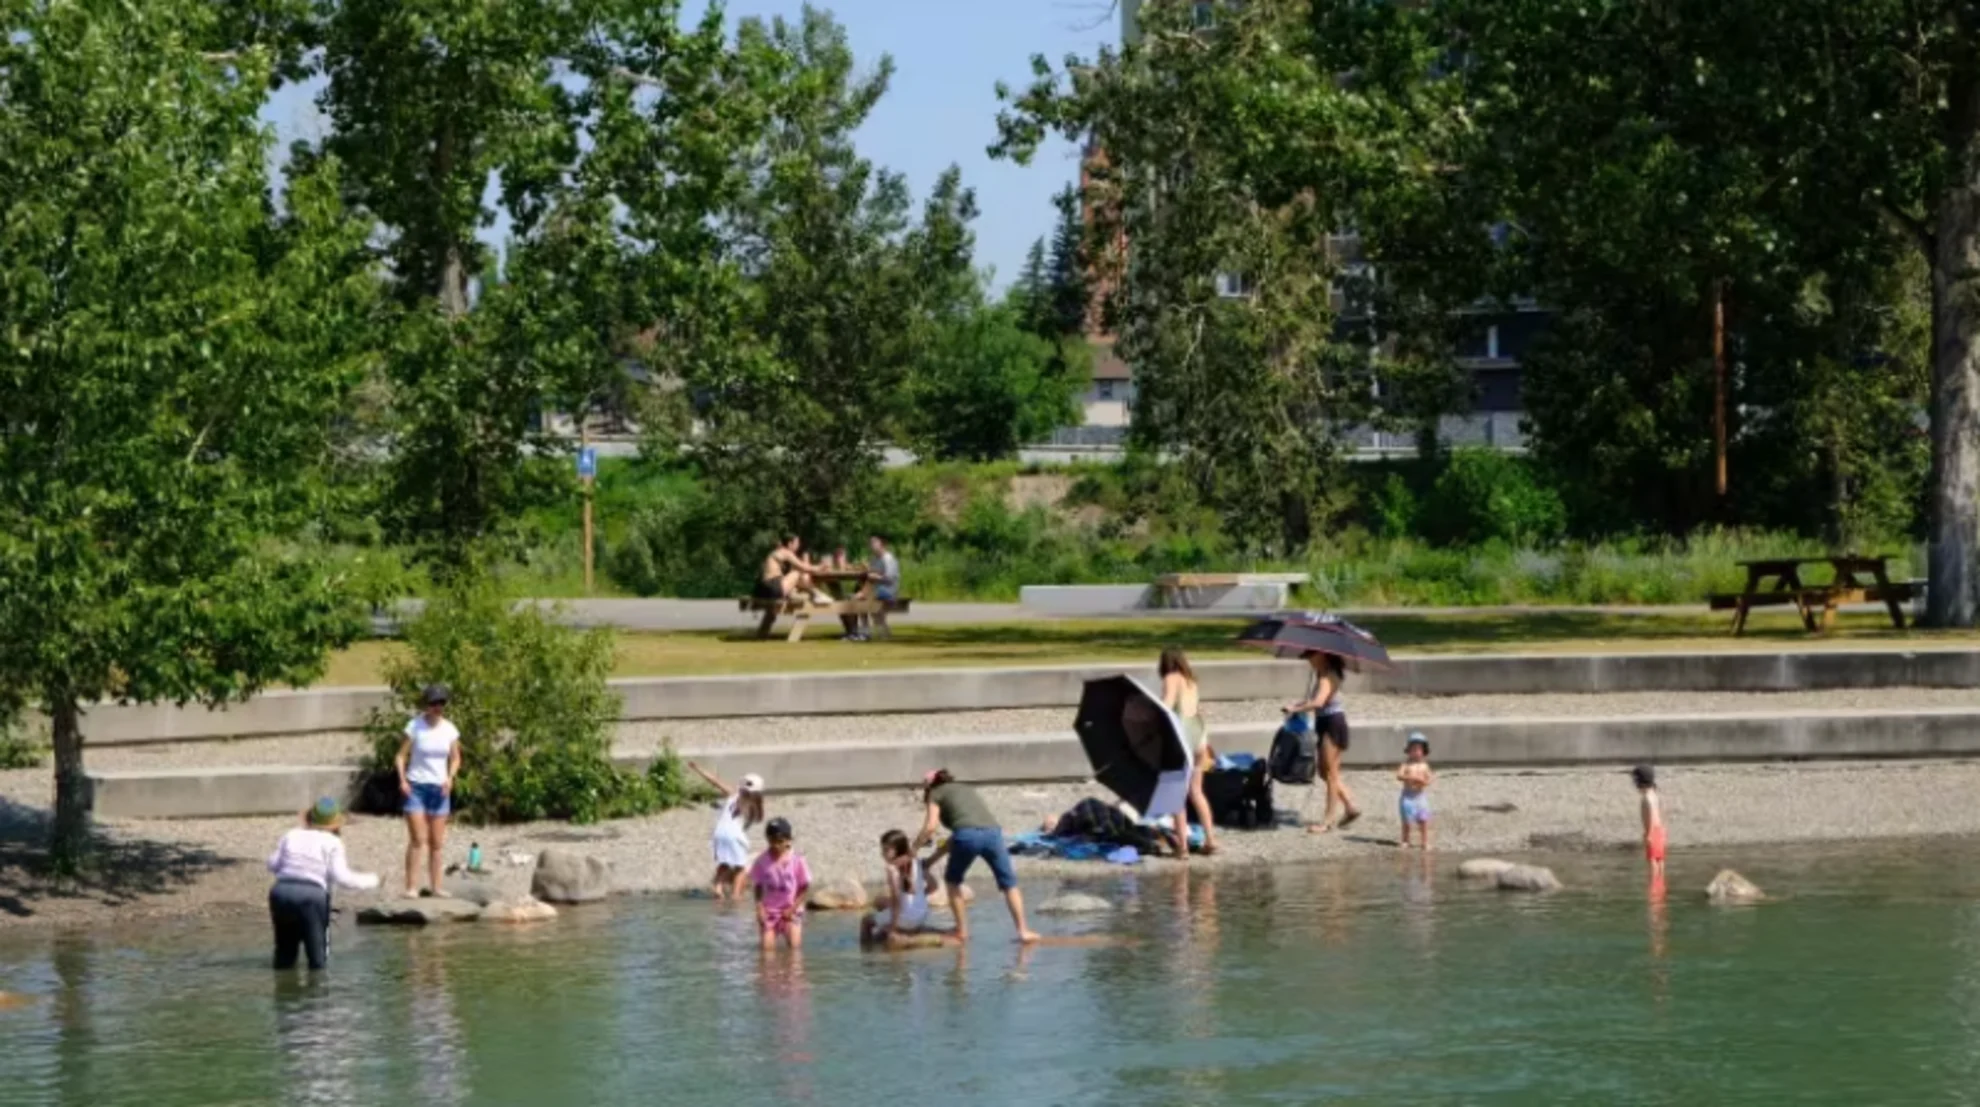 Outdoor pools in Calgary now allowed as water supply restoration work continues